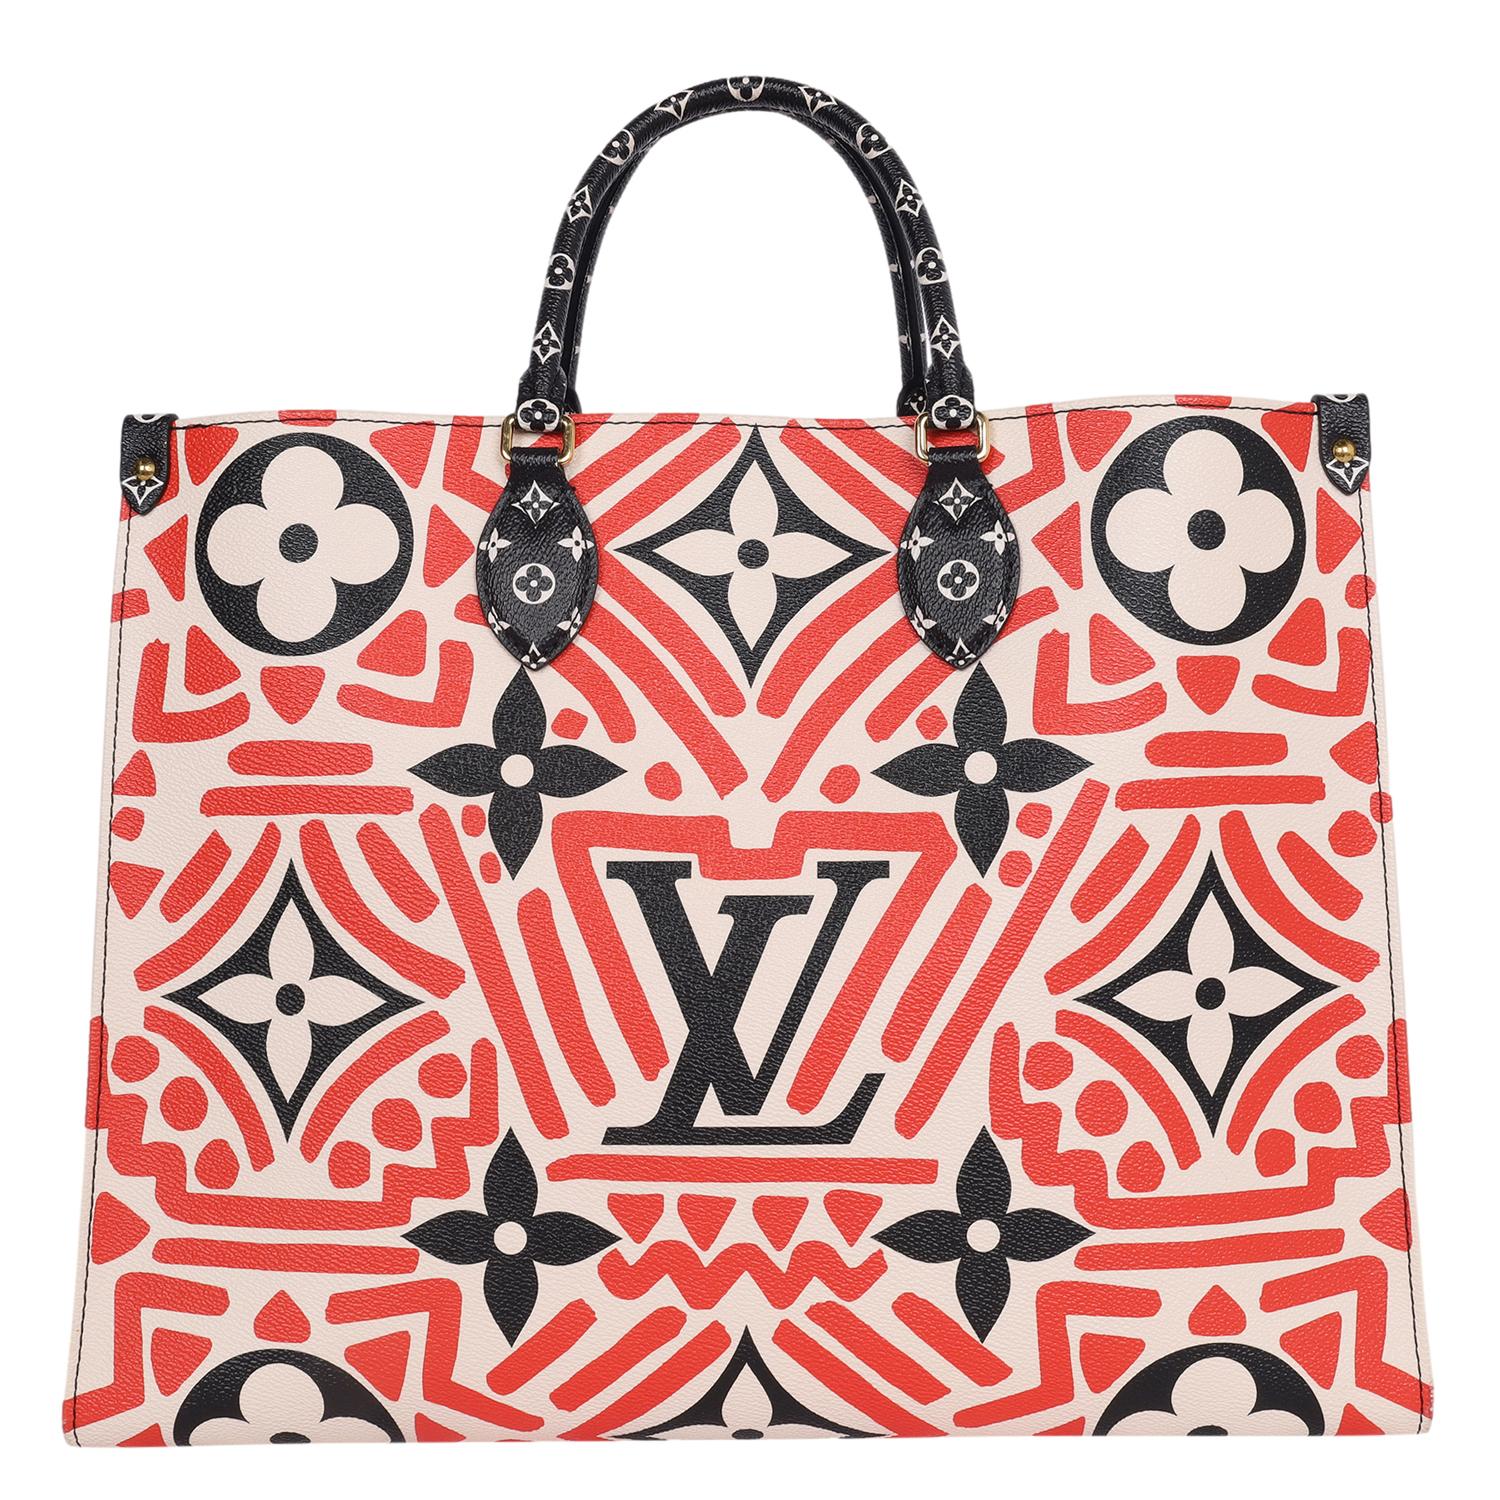 Louis Vuitton Red Black OnTheGo Tote Crafty Monogram Handbag 2020 In Excellent Condition For Sale In Salt Lake Cty, UT